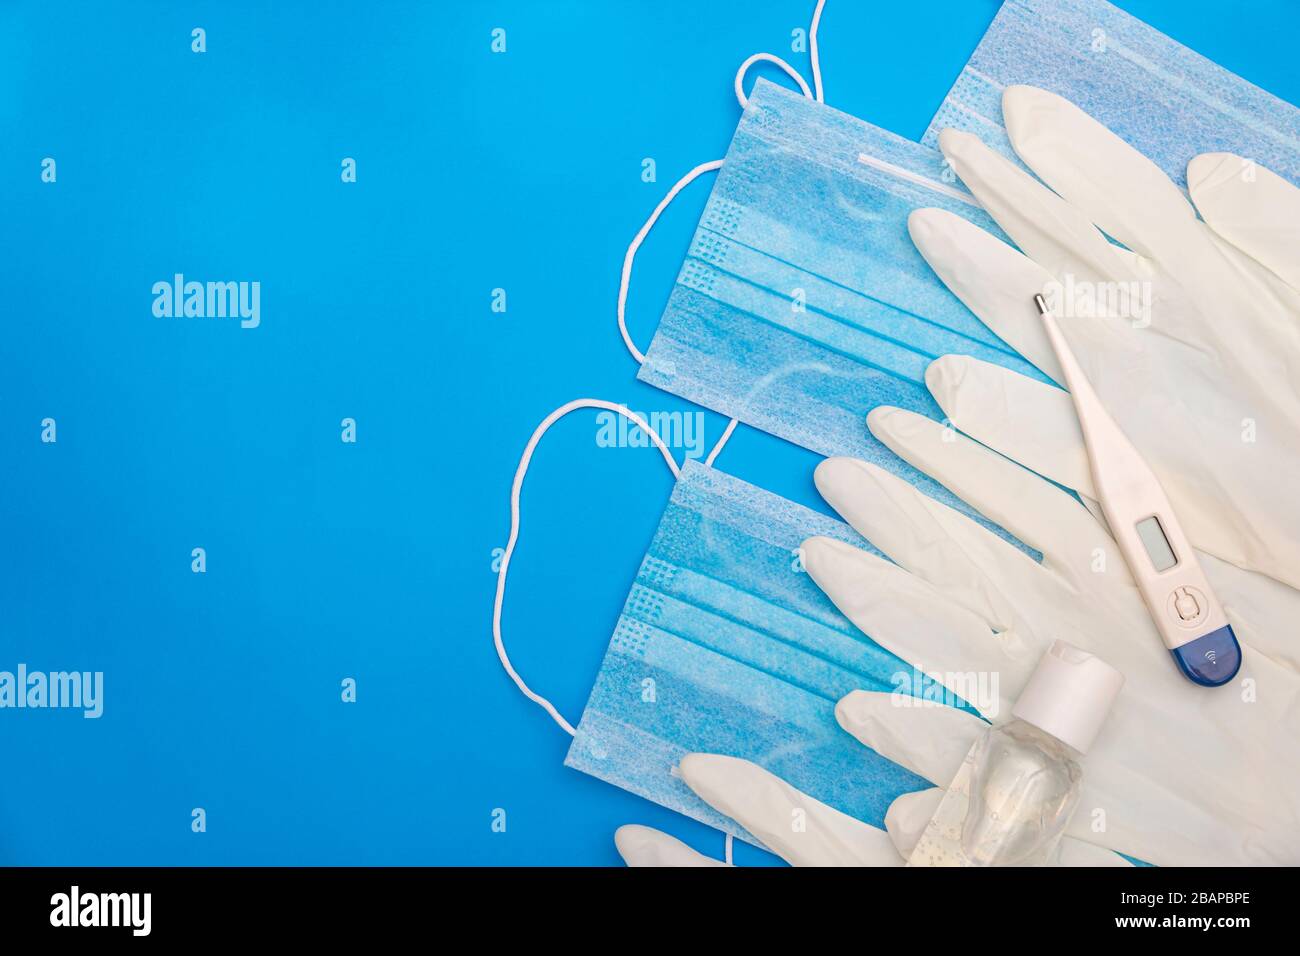 top view image of medical supplies to prevent pandemic infection on classic blue background Stock Photo